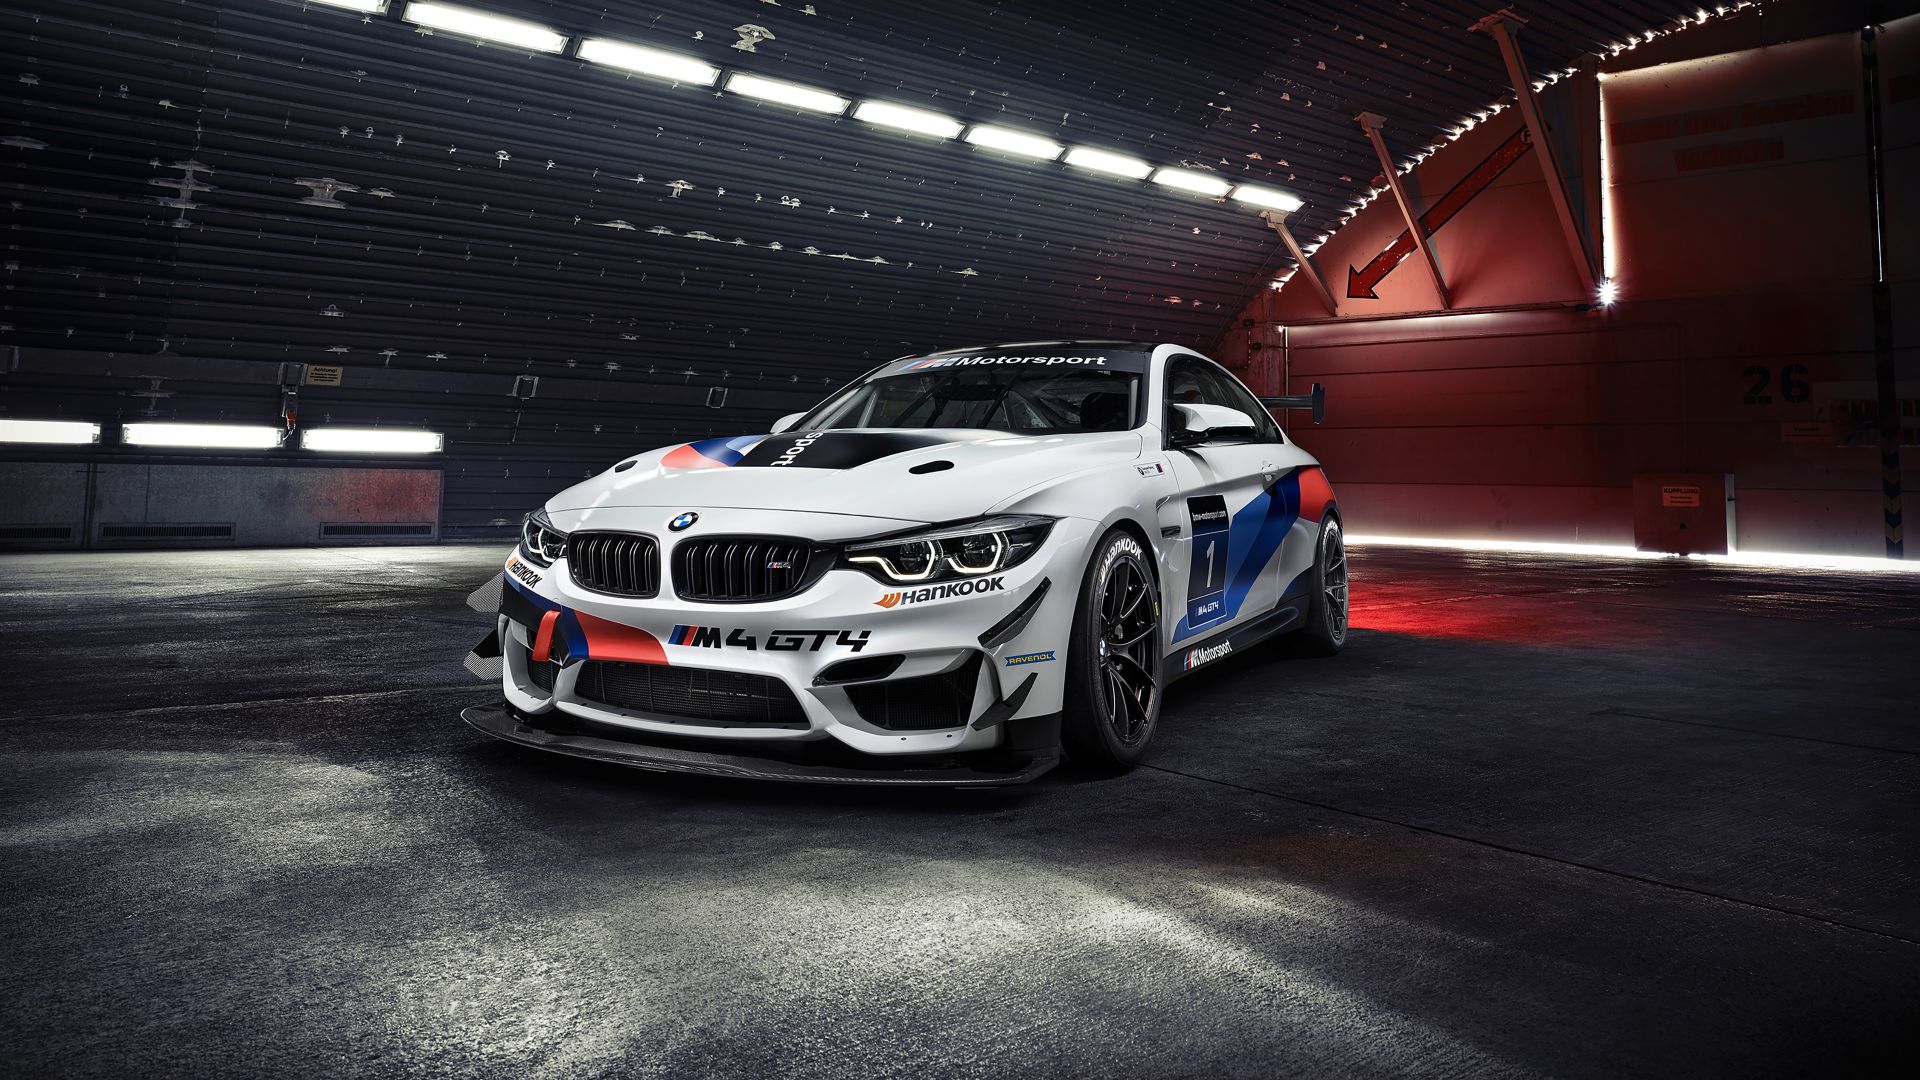 Luxury Car, Front View, Bmw M4 Gt4 Wallpaper, HD Image, Picture, Background, 400fd1